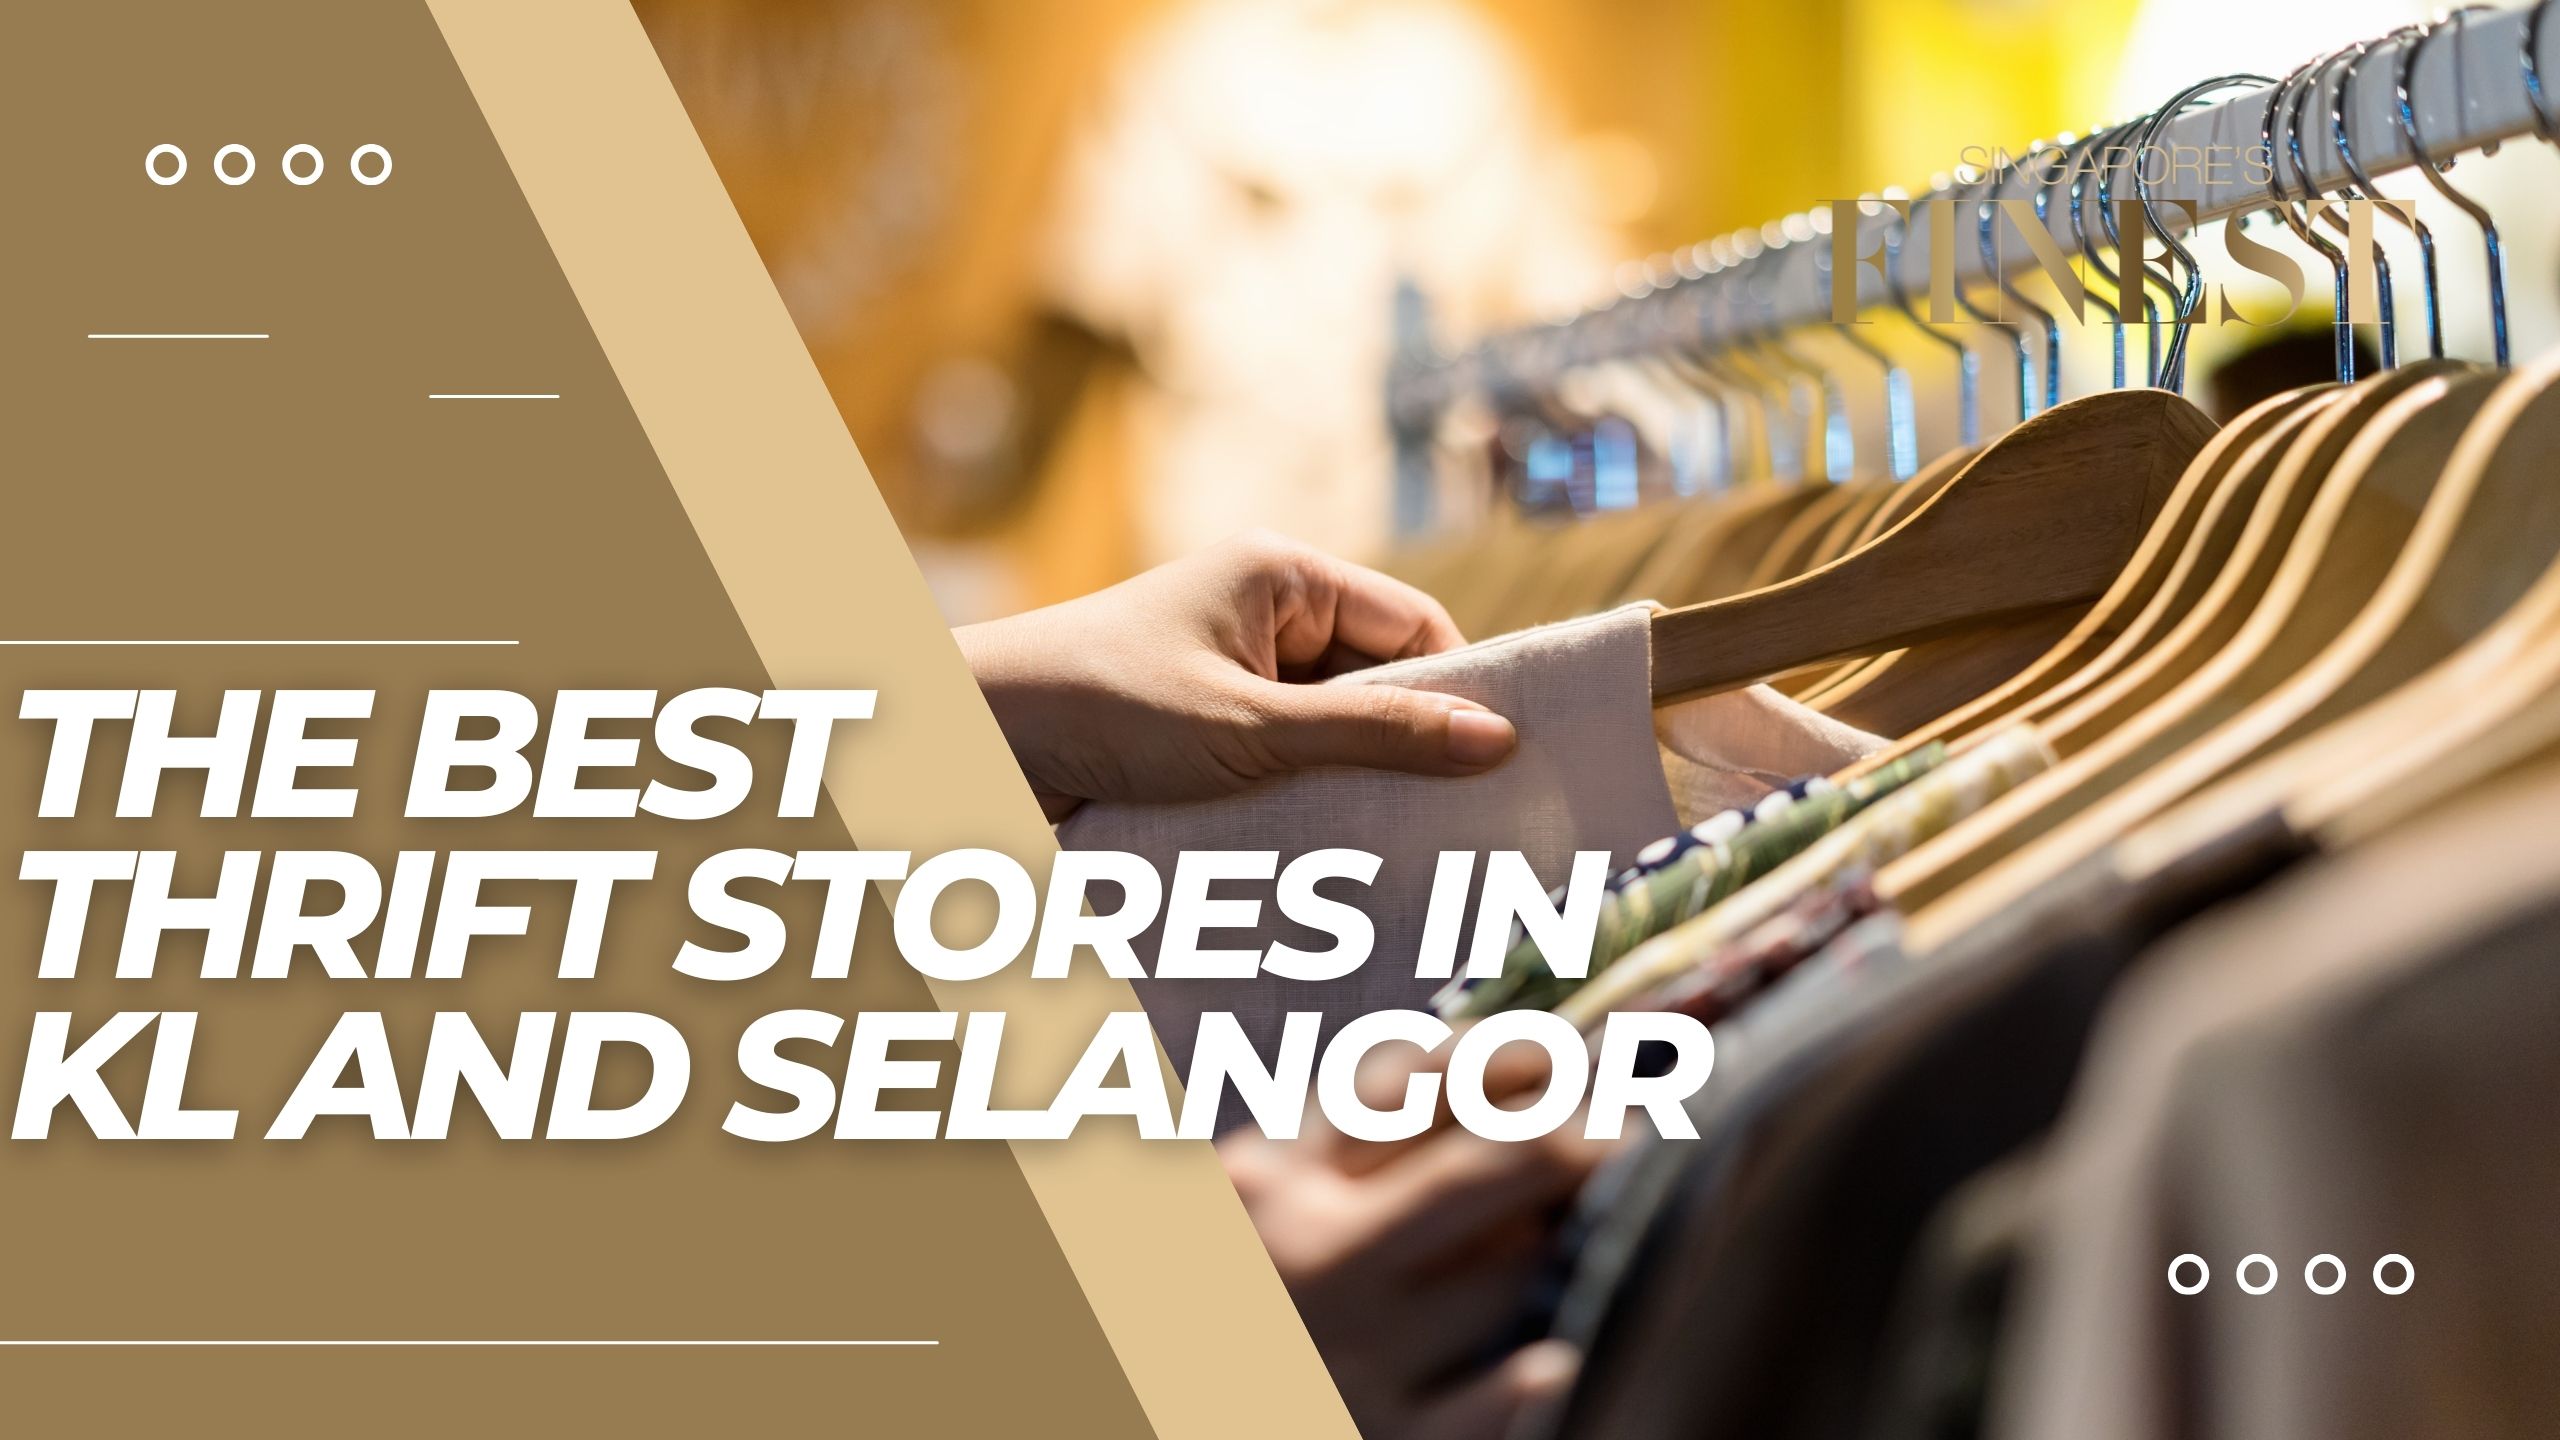 The Finest Thrift Stores in KL and Selangor